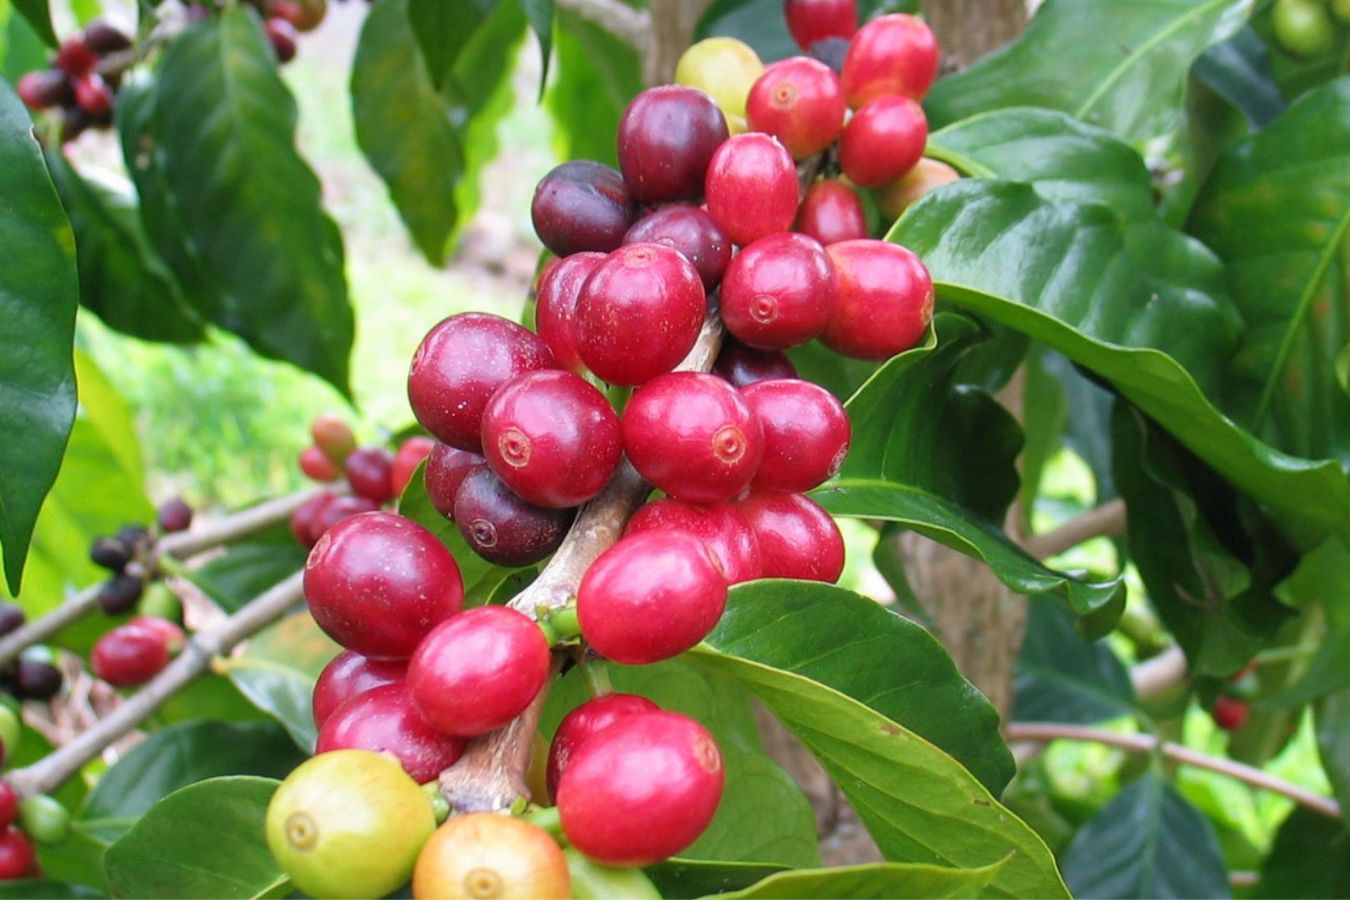 Specialty Coffee And Commercial Coffee: 3 Key Differences In Processing 